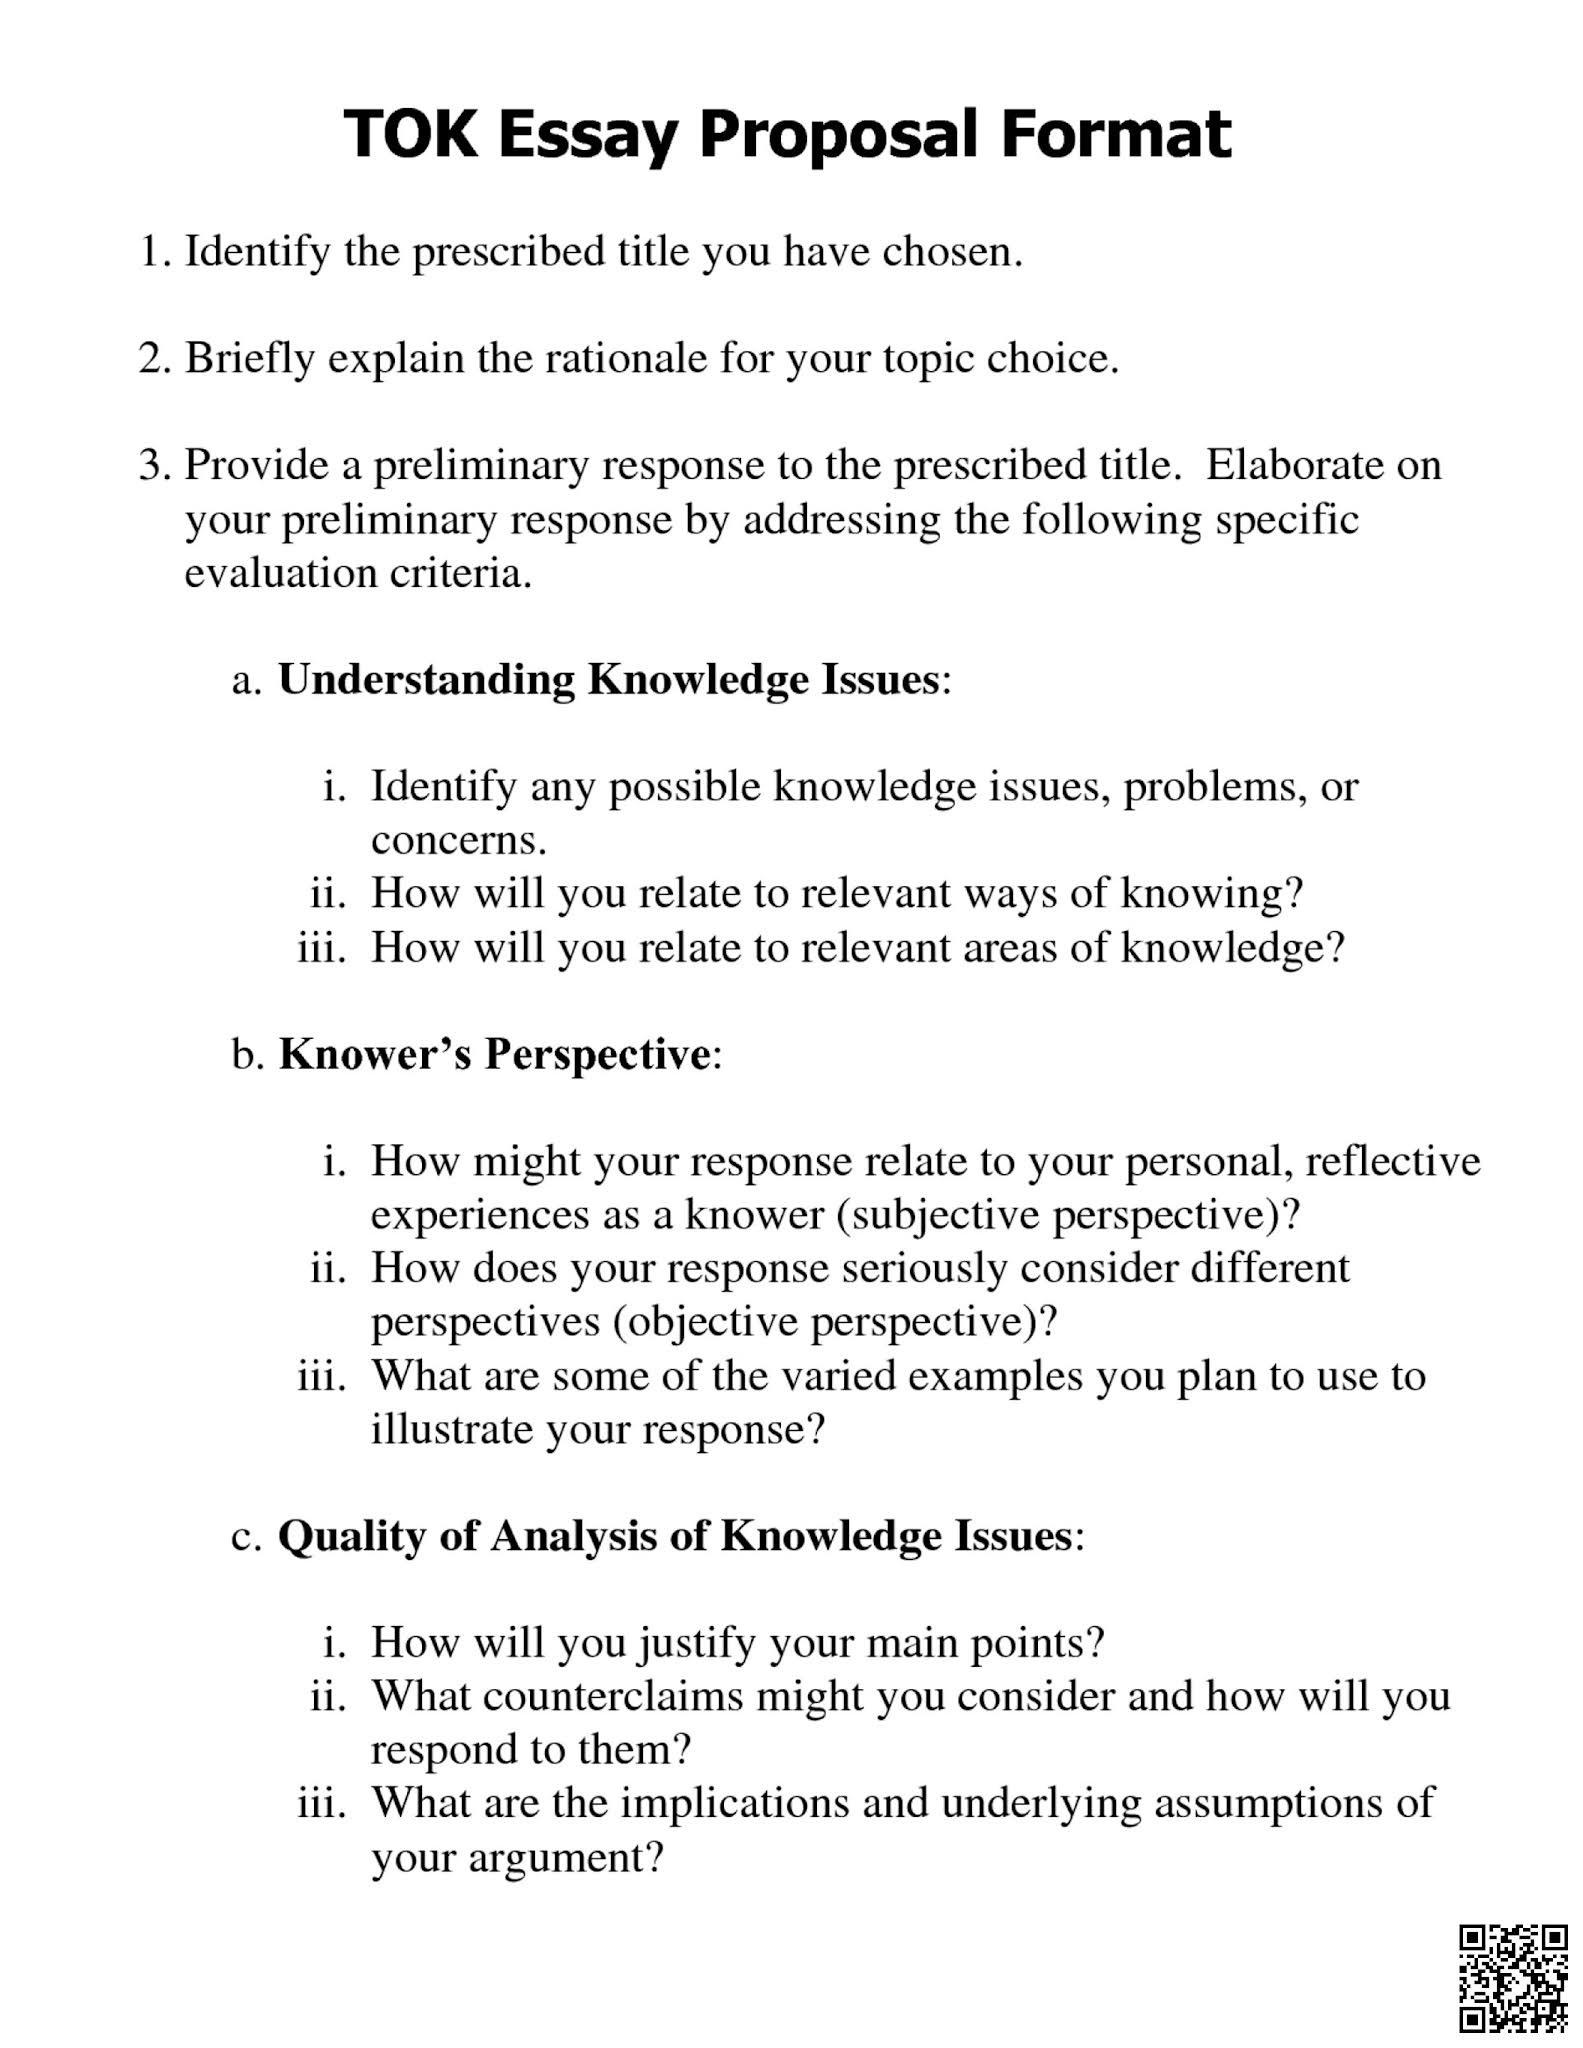 How to Write a Proposal Essay Example